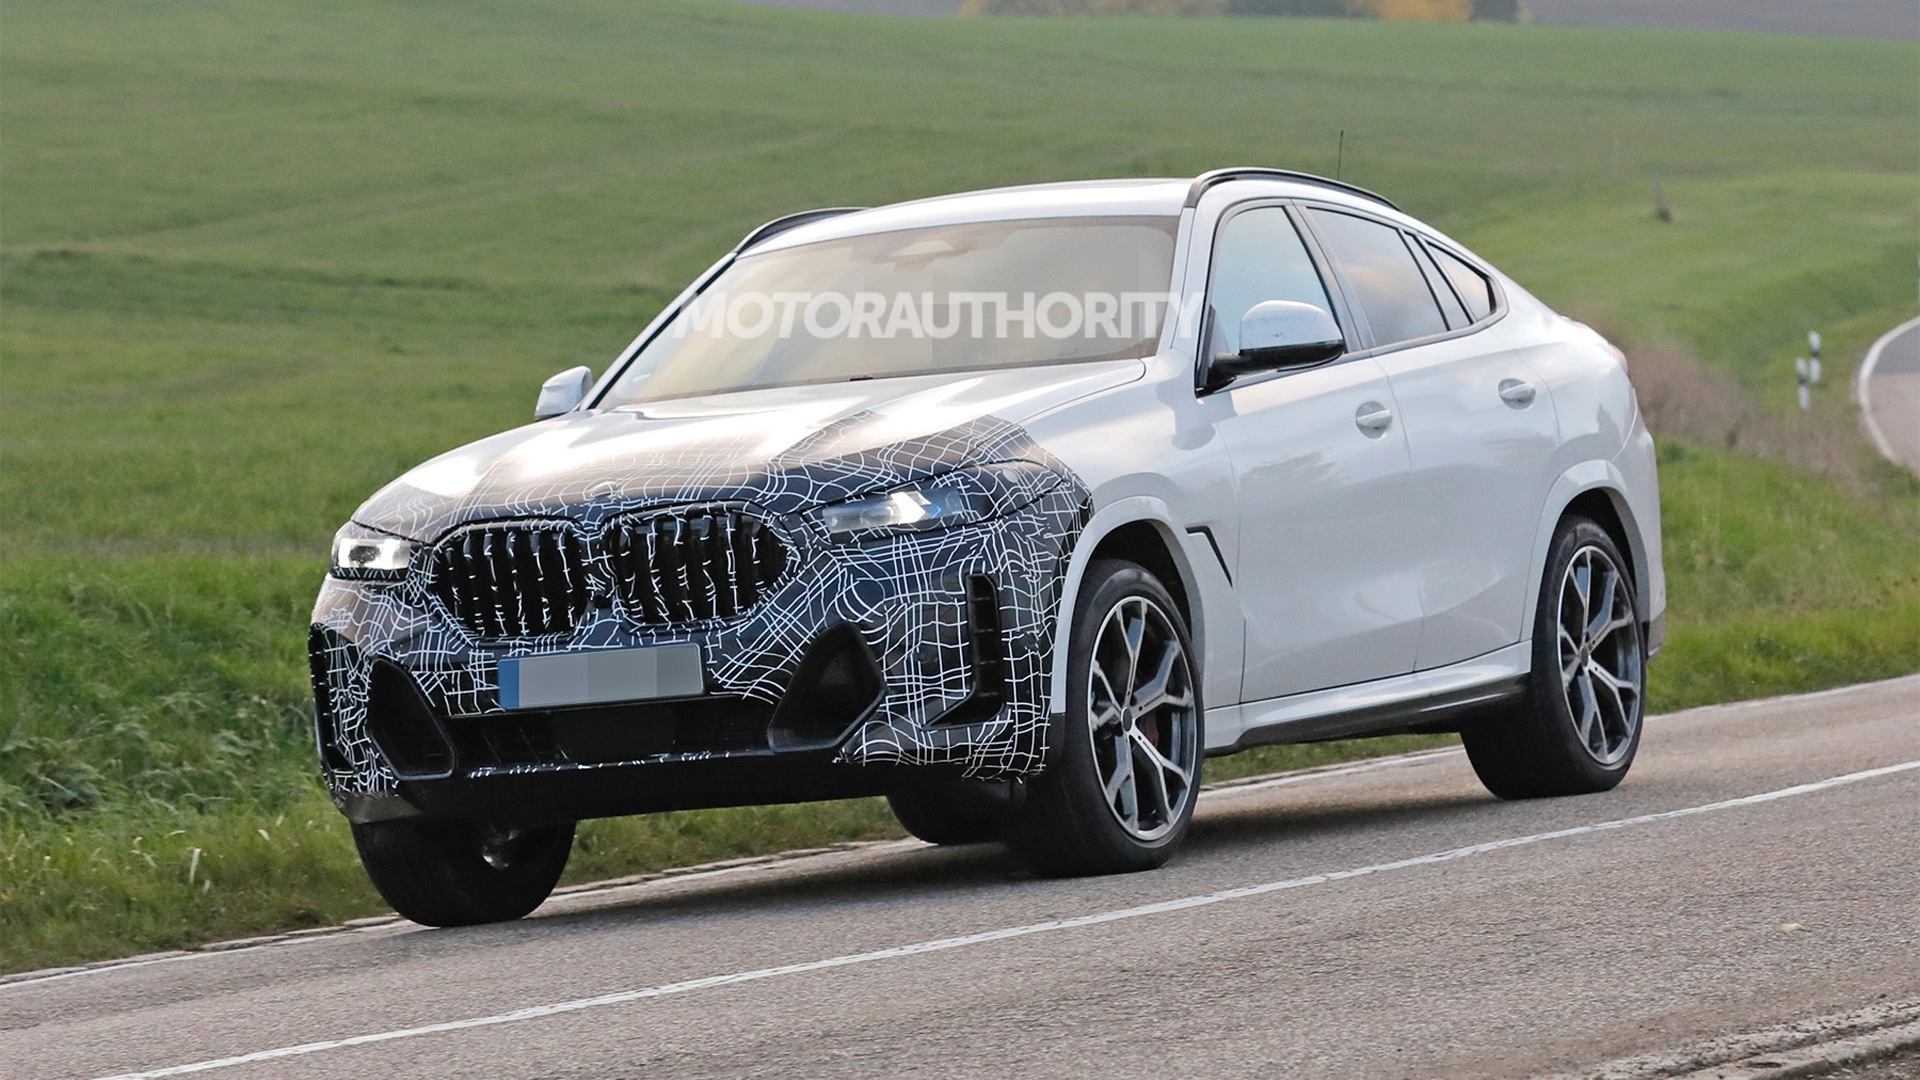 2023 BMW X6 spy shots: Minor update pegged for coupe-like SUV